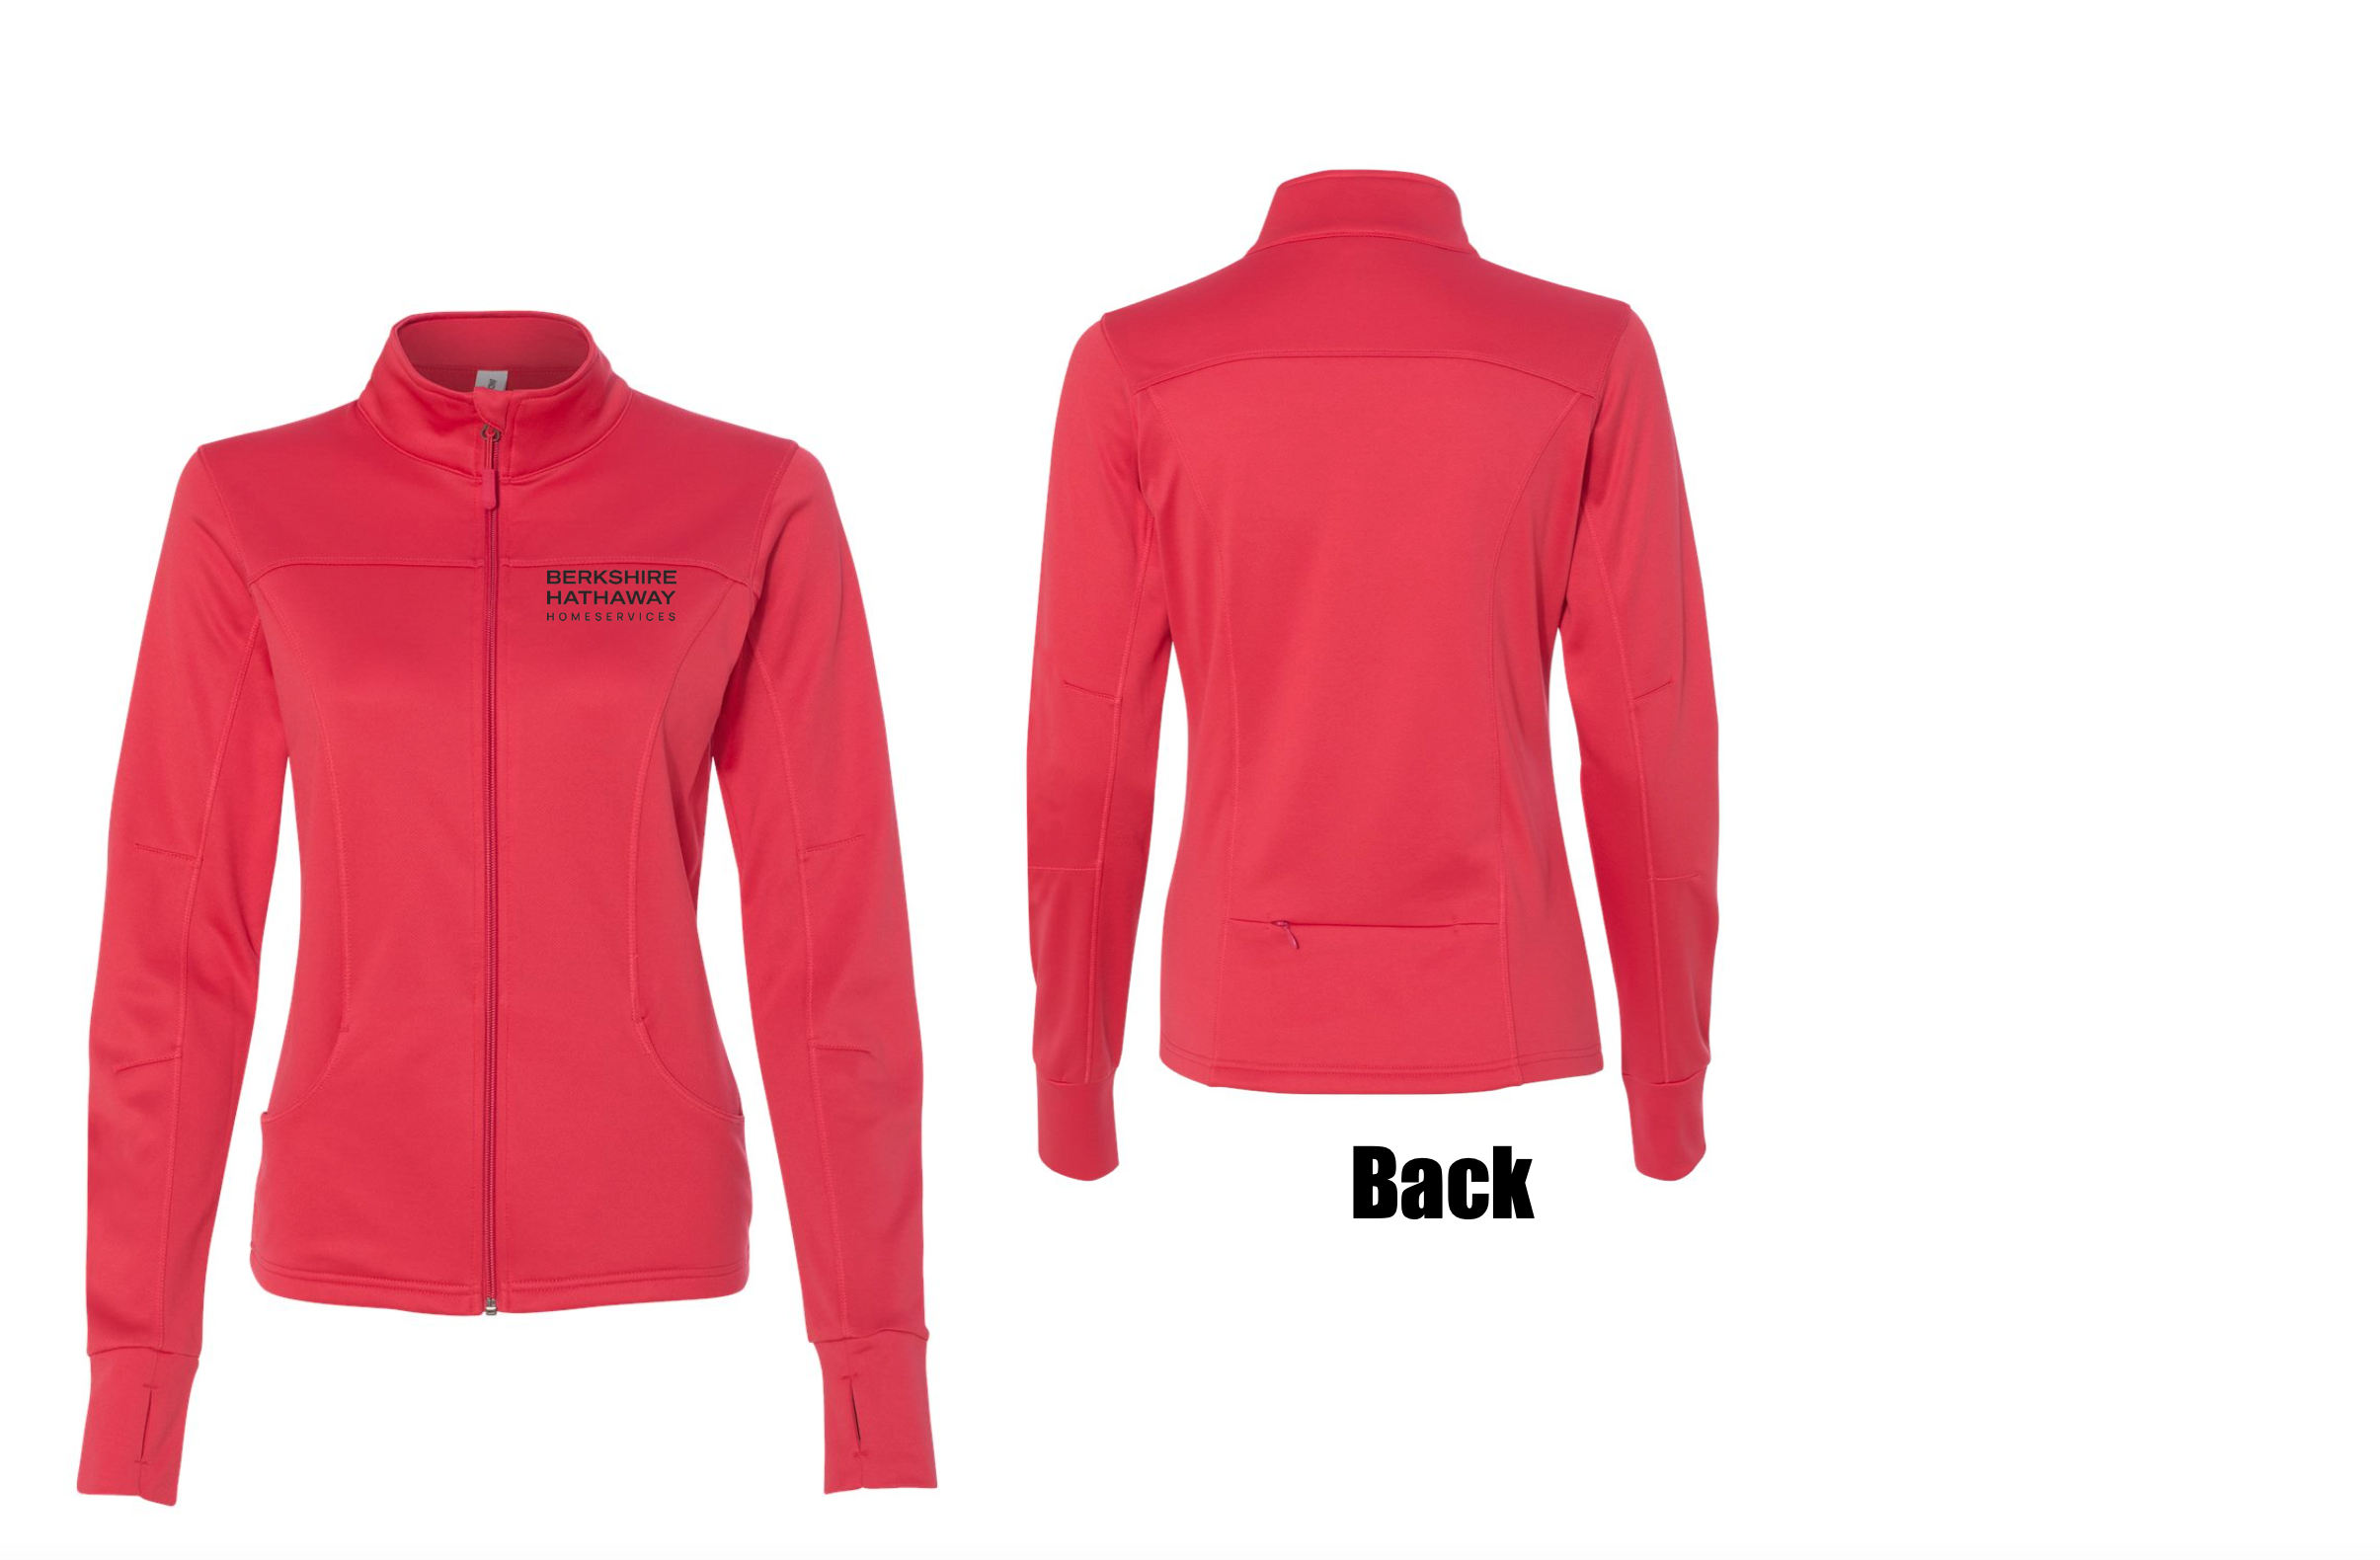 Womens Berkshire Hathaway HomeServices Poly-Tech Full-Zip Track Jacket